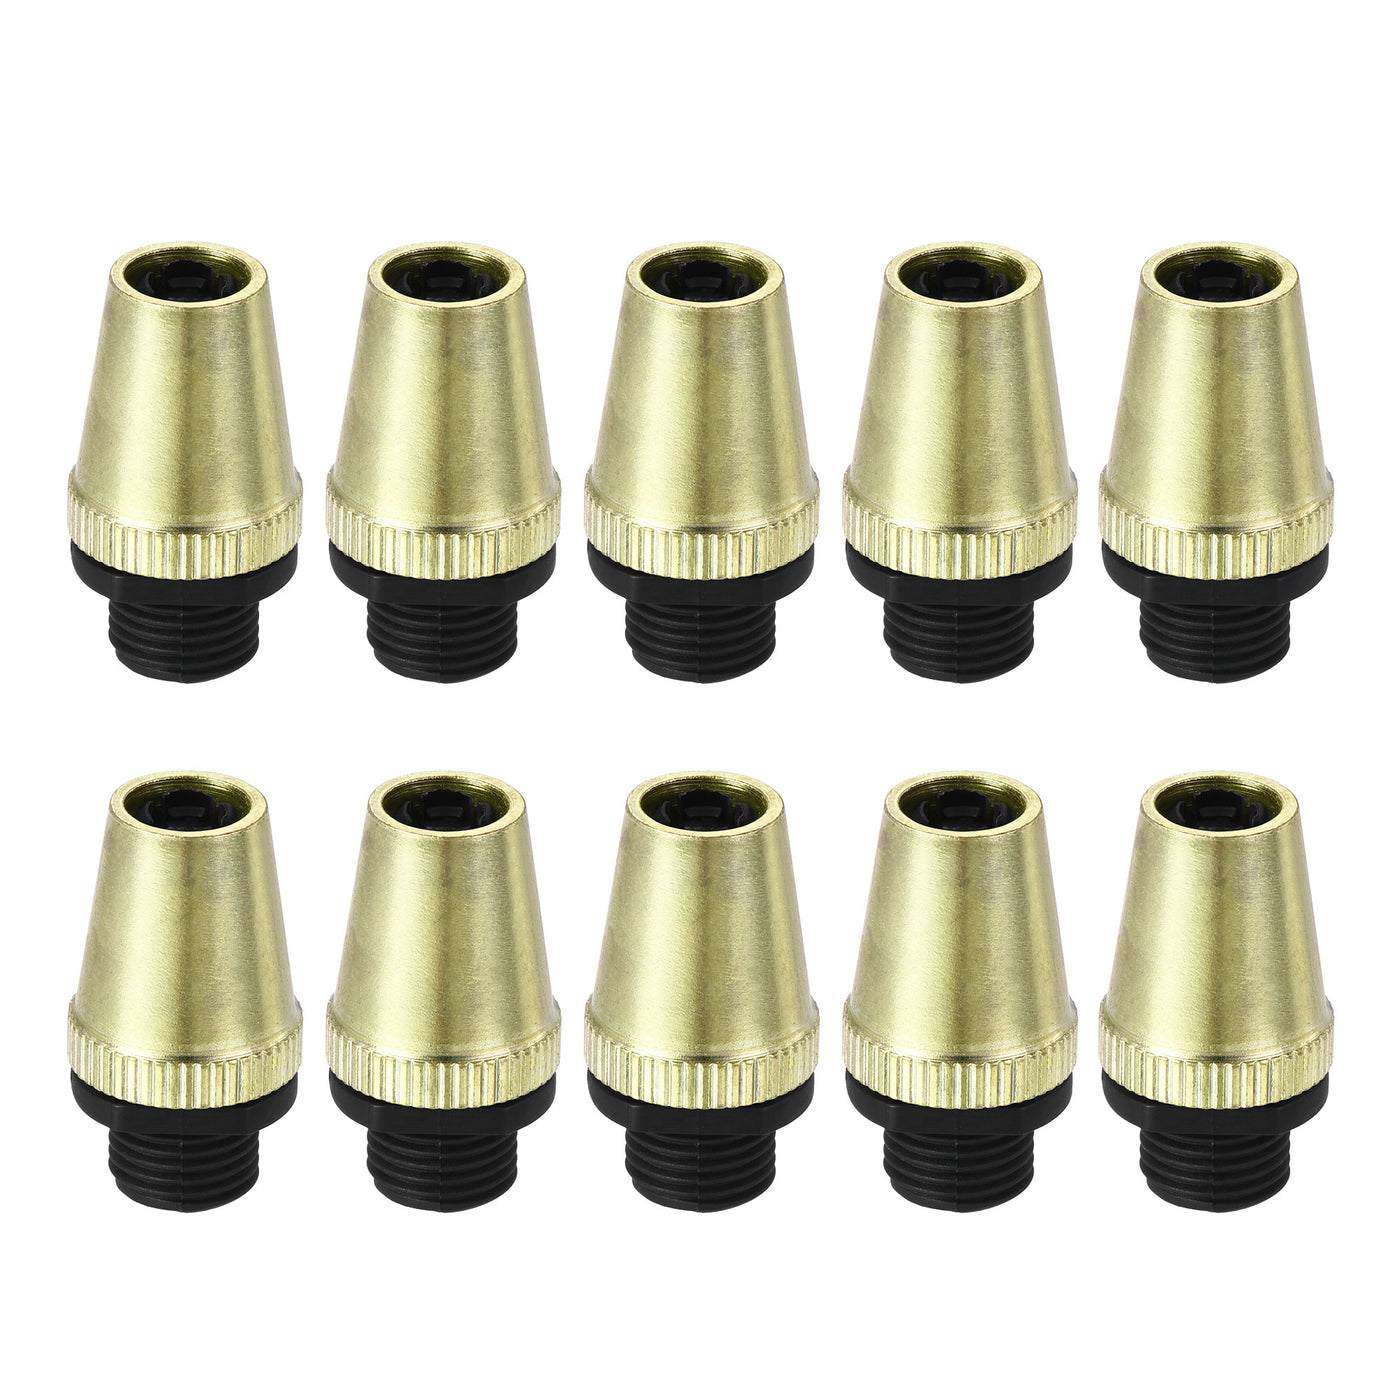 uxcell Uxcell Cable Glands Strain Relief Cord Grips Metal Gold Tone 10Pcs for Wiring Hanging Light Ceiling Pendant Lamp